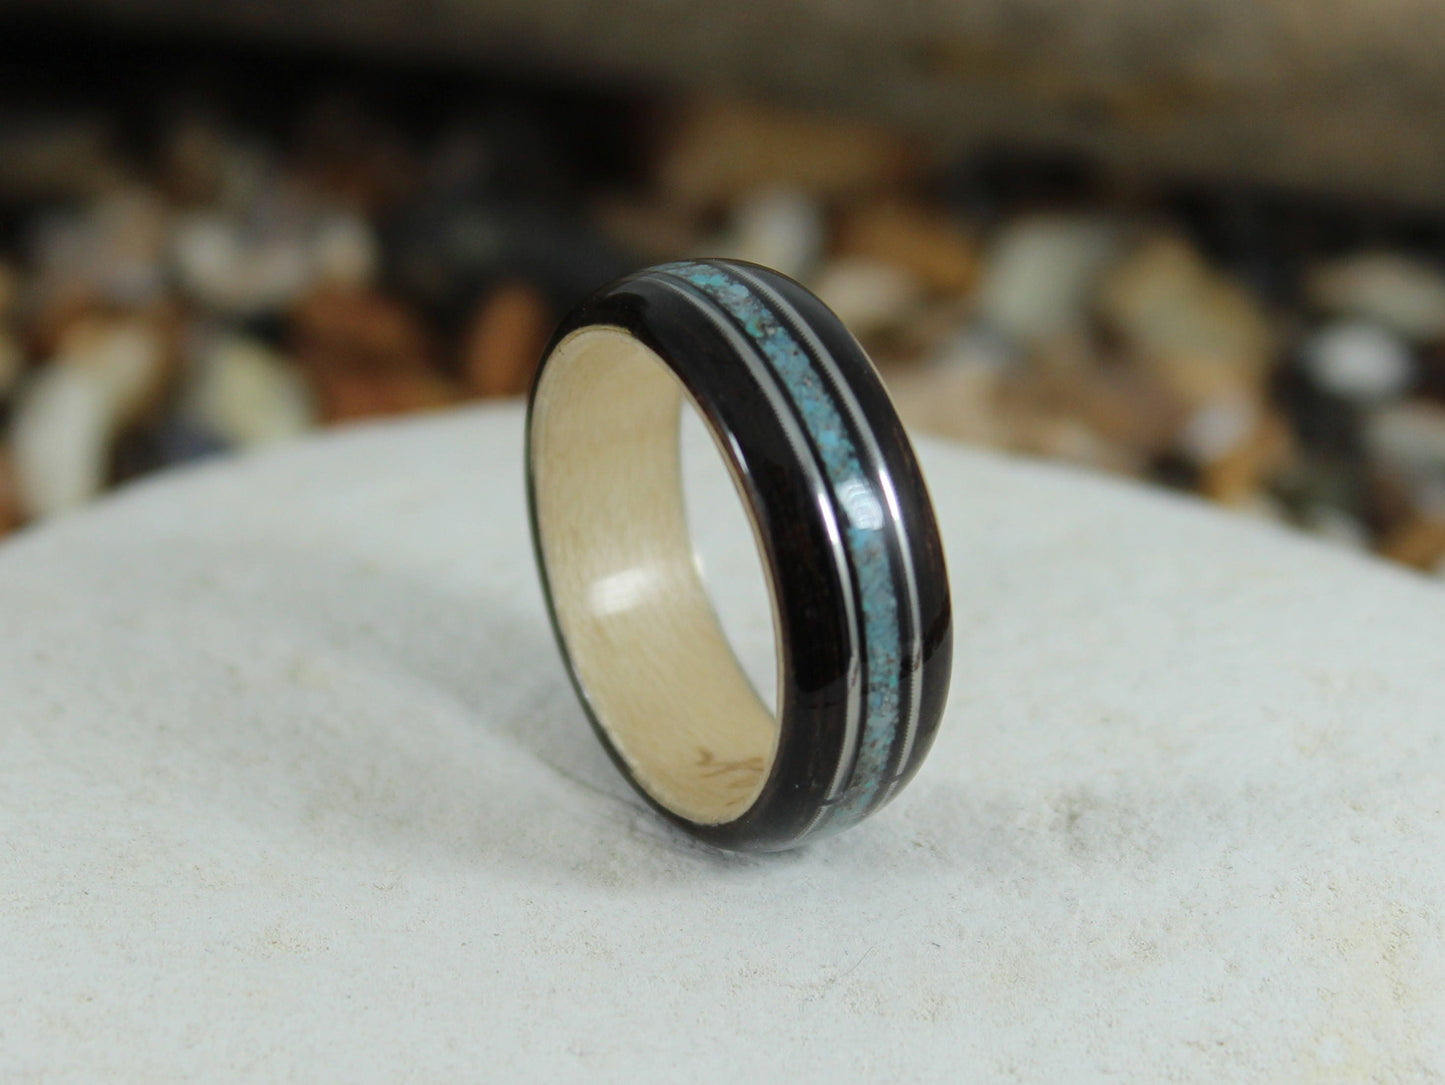 Ebony & Maple Wood Ring with Turquoise and Guitar Strings Bent Wood Ring